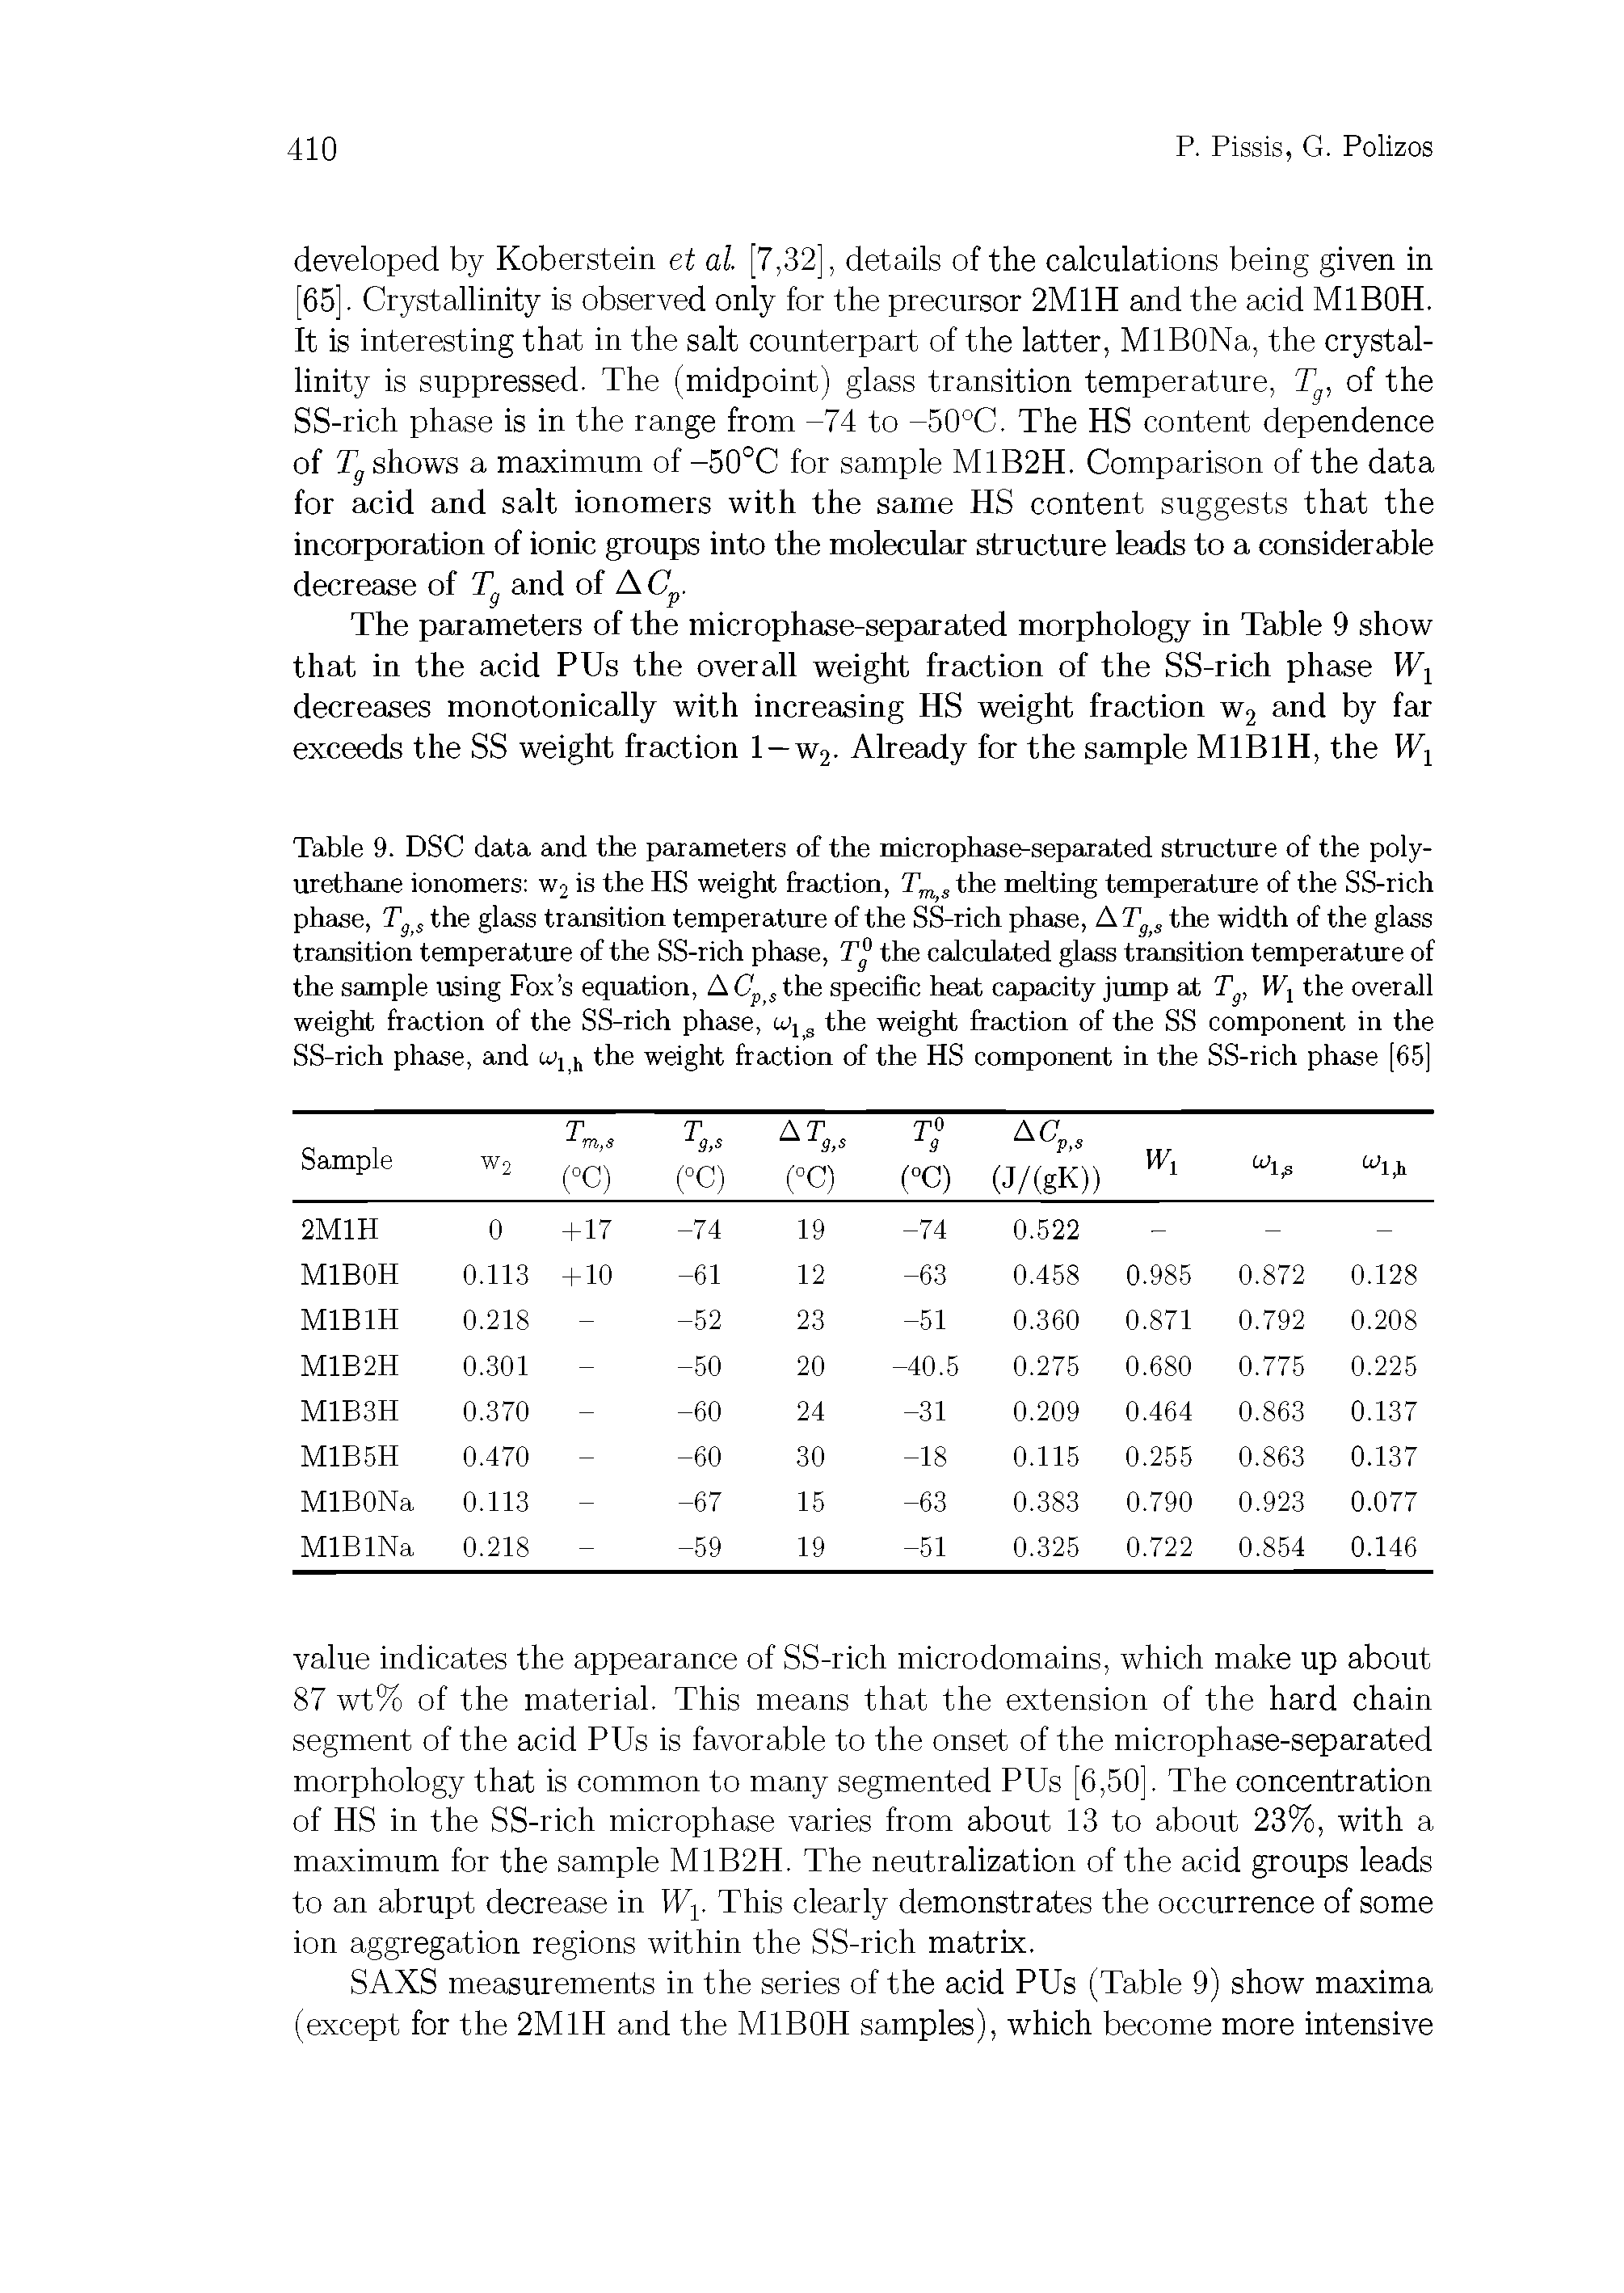 Table 9. DSC data and the parameters of the microphase-separated structure of the polyurethane ionomers W2 is the HS weight fraction, the melting temperature of the SS-rich phase, Tg s the glass transition temperature of the SS-rich phase, AT the width of the glass transition temperature of the SS-rich phase, T the calculated glass transition temperature of the sample using Fox s equation, A the specific heat capacity jump at Tg, Wi the overall weight fraction of the SS-rich phase, Wj the weight fraction of the SS component in the SS-rich phase, and Wj j, the weight fraction of the HS component in the SS-rich phase 65 ...